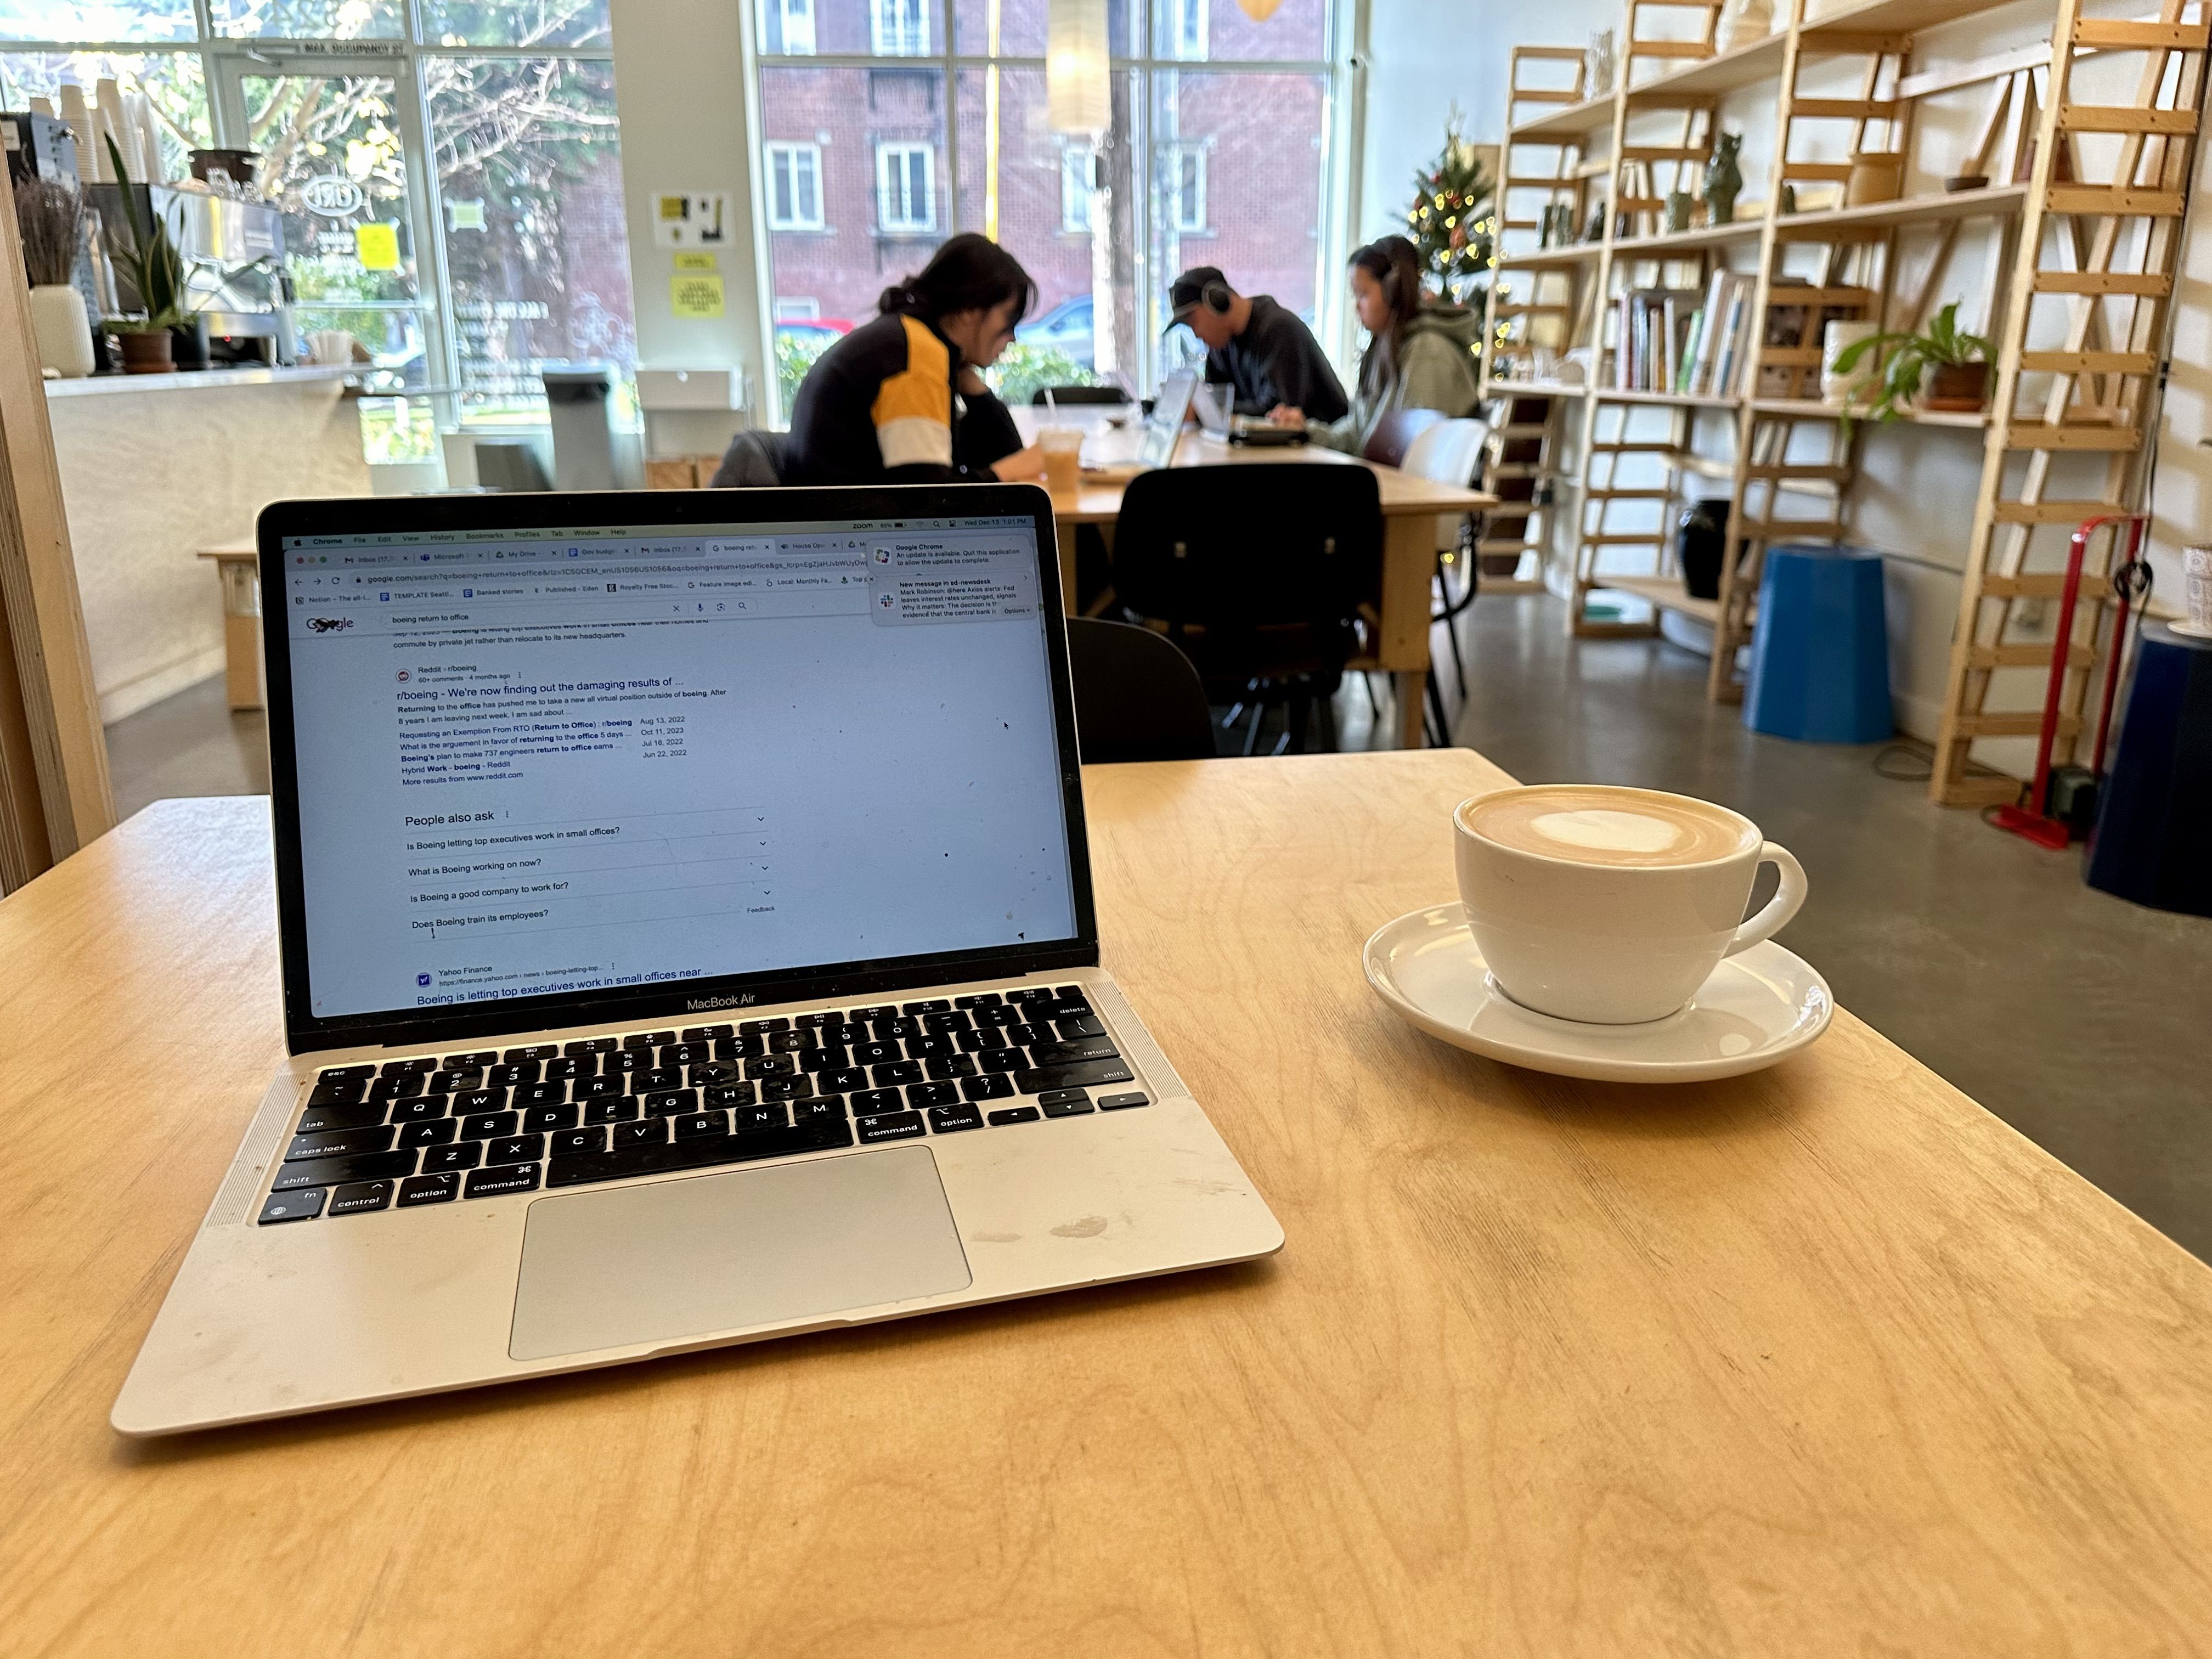 A laptop and a cappuccino sitting on a light colored wood table with bookshelves and people working in background.